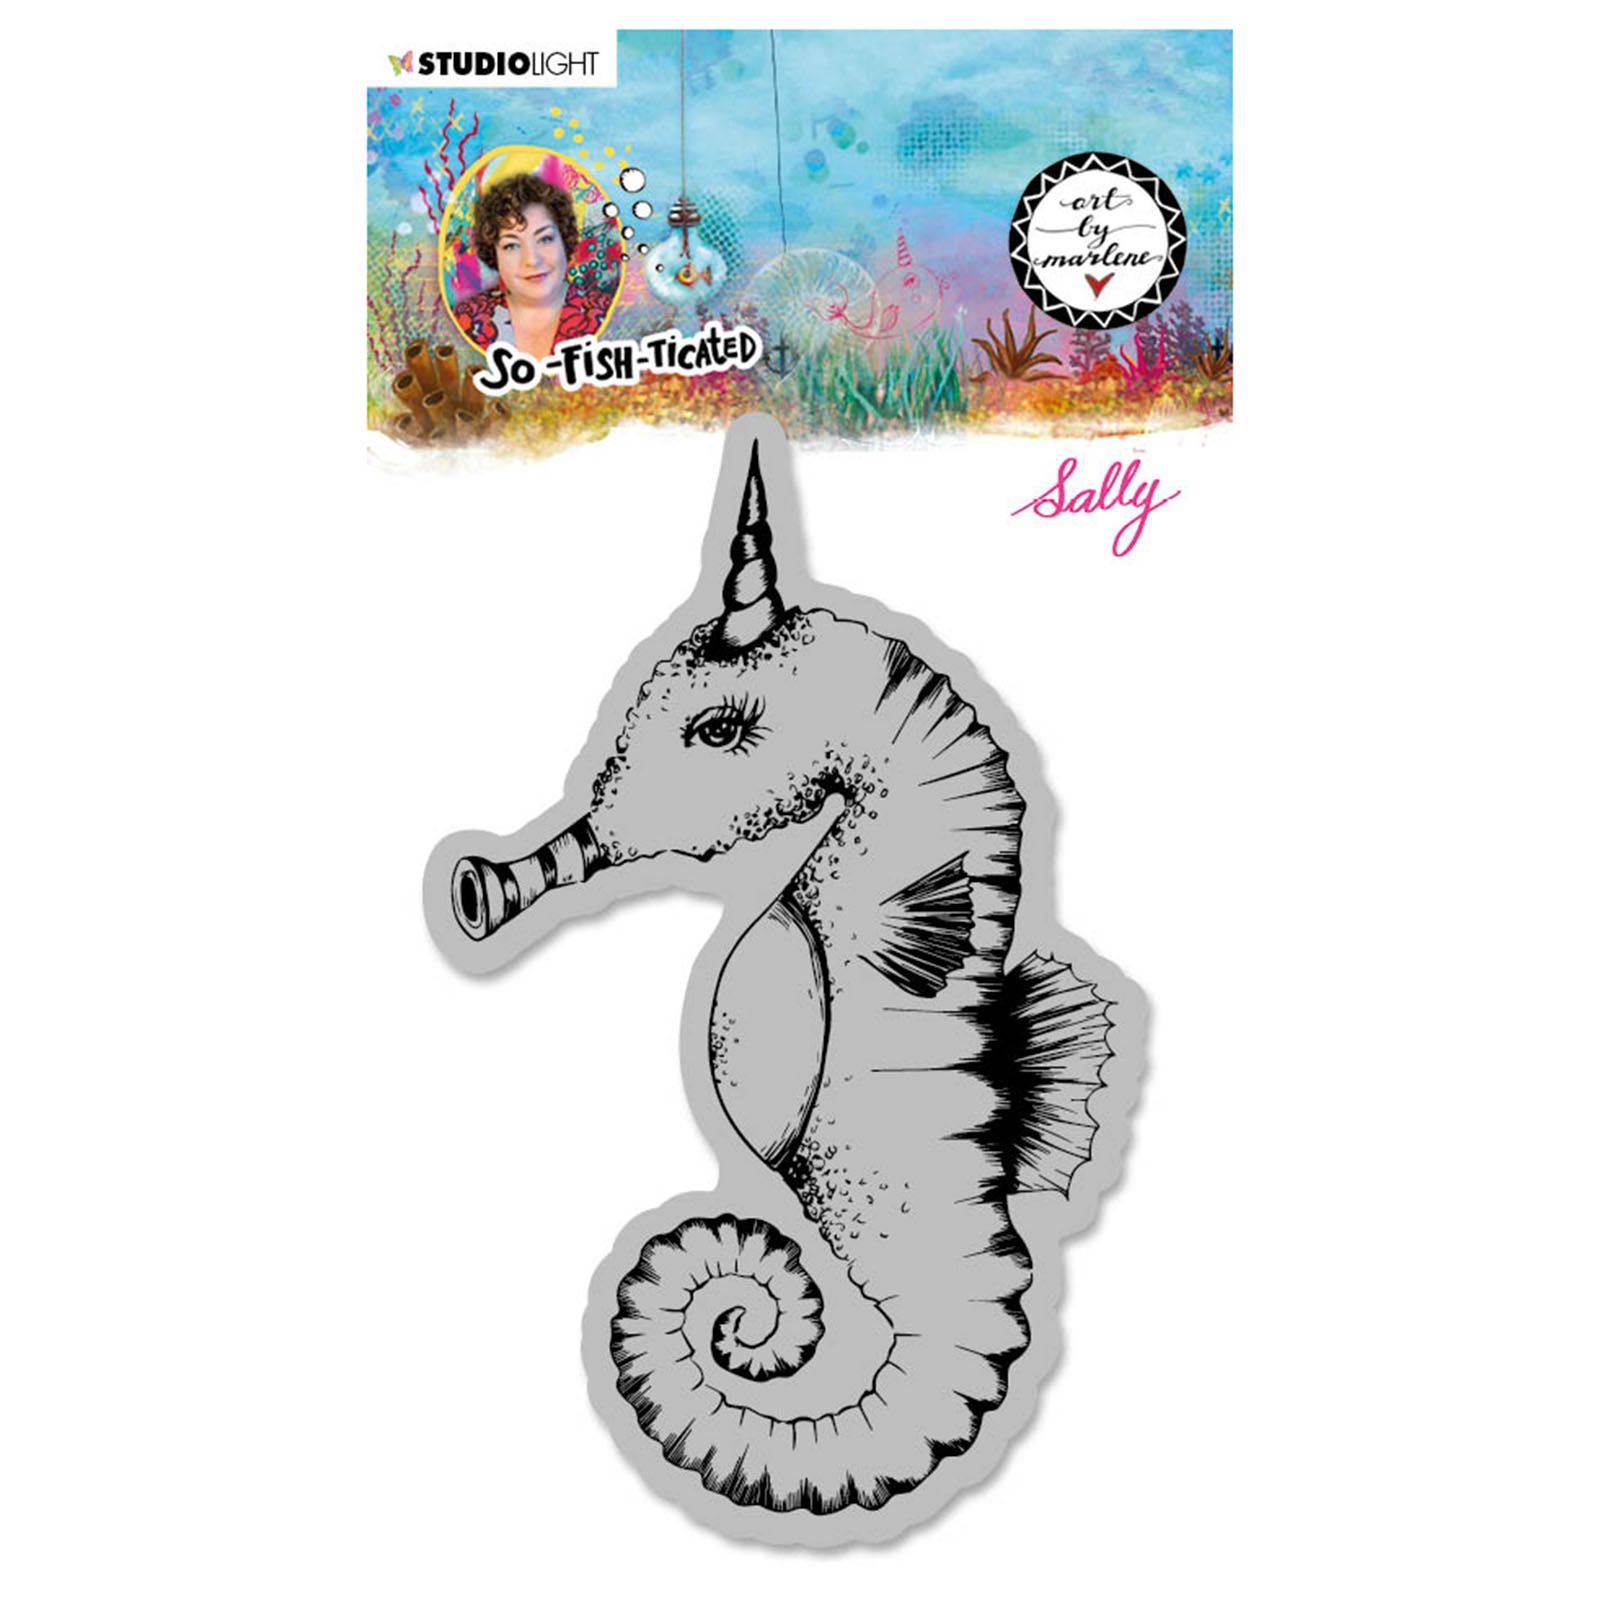 Studio Light • Cling stamp Sally (Sea horse) So-Fish-Ticated nr.16